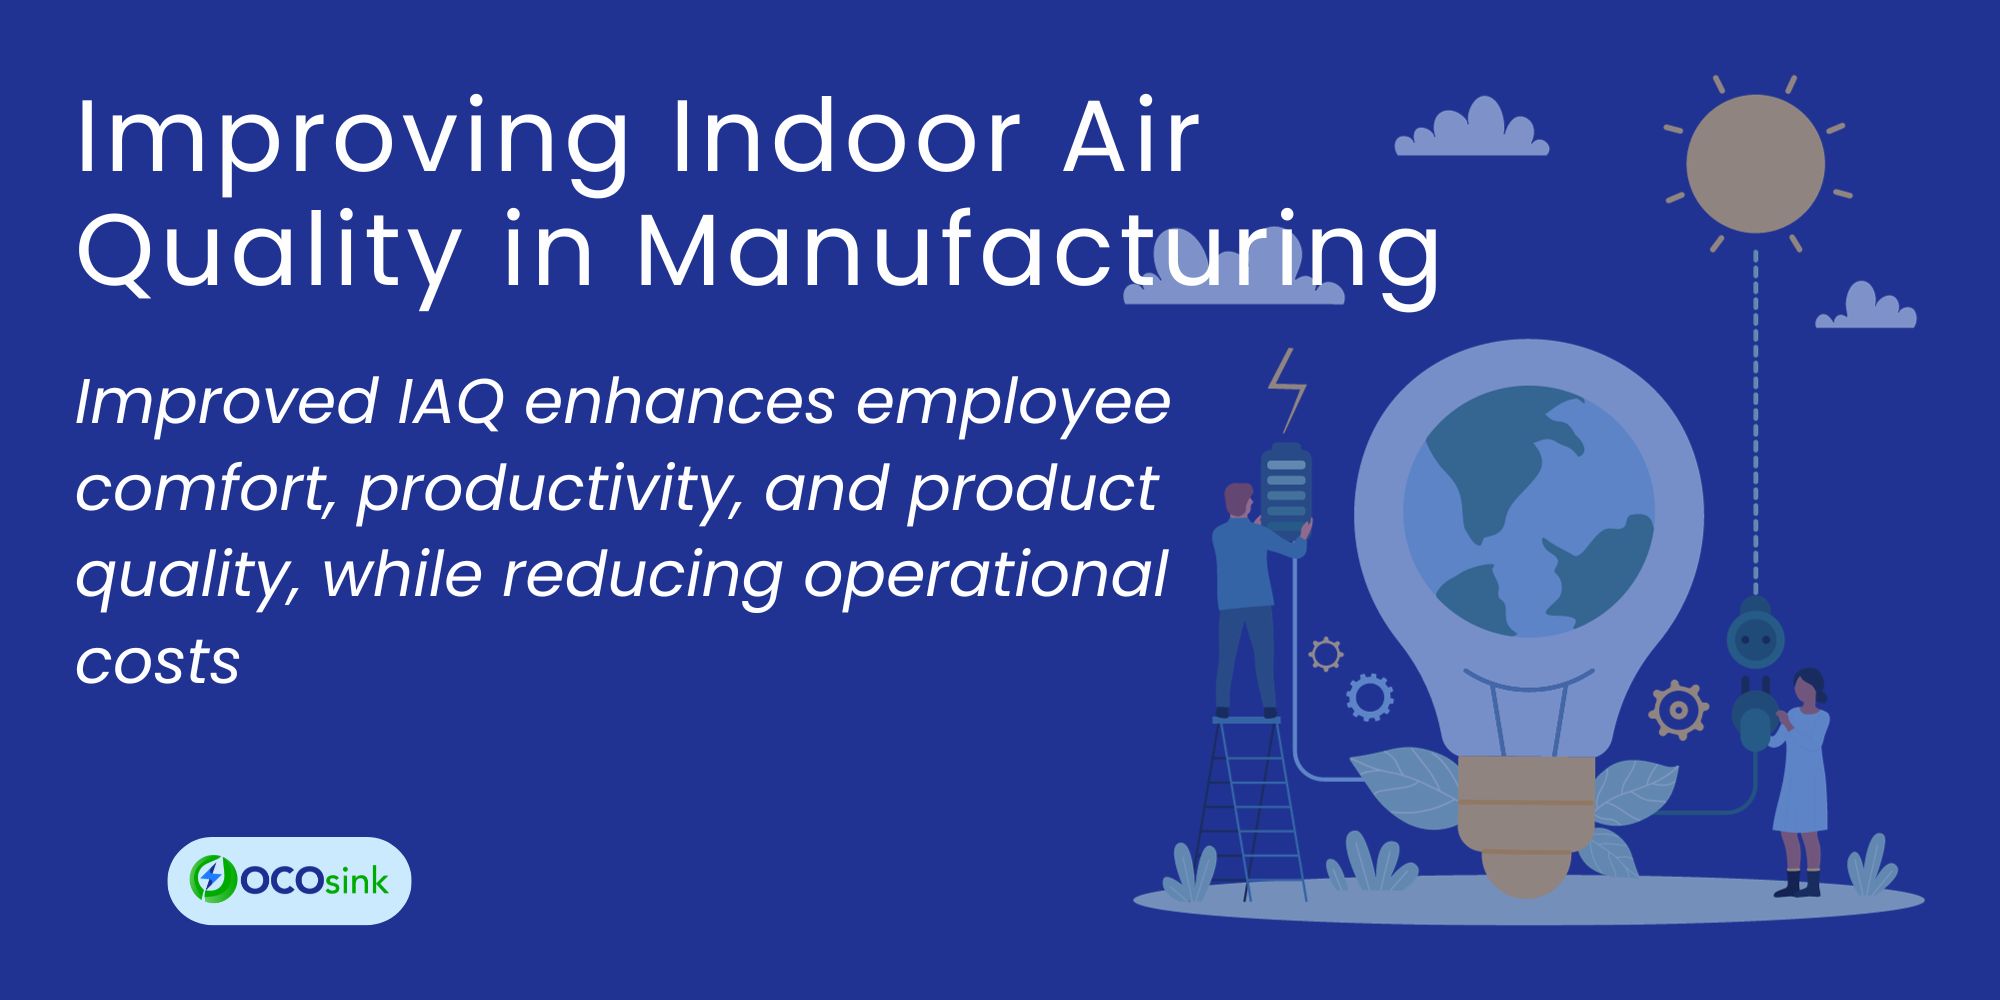 Improving IAQ in Manufacturing